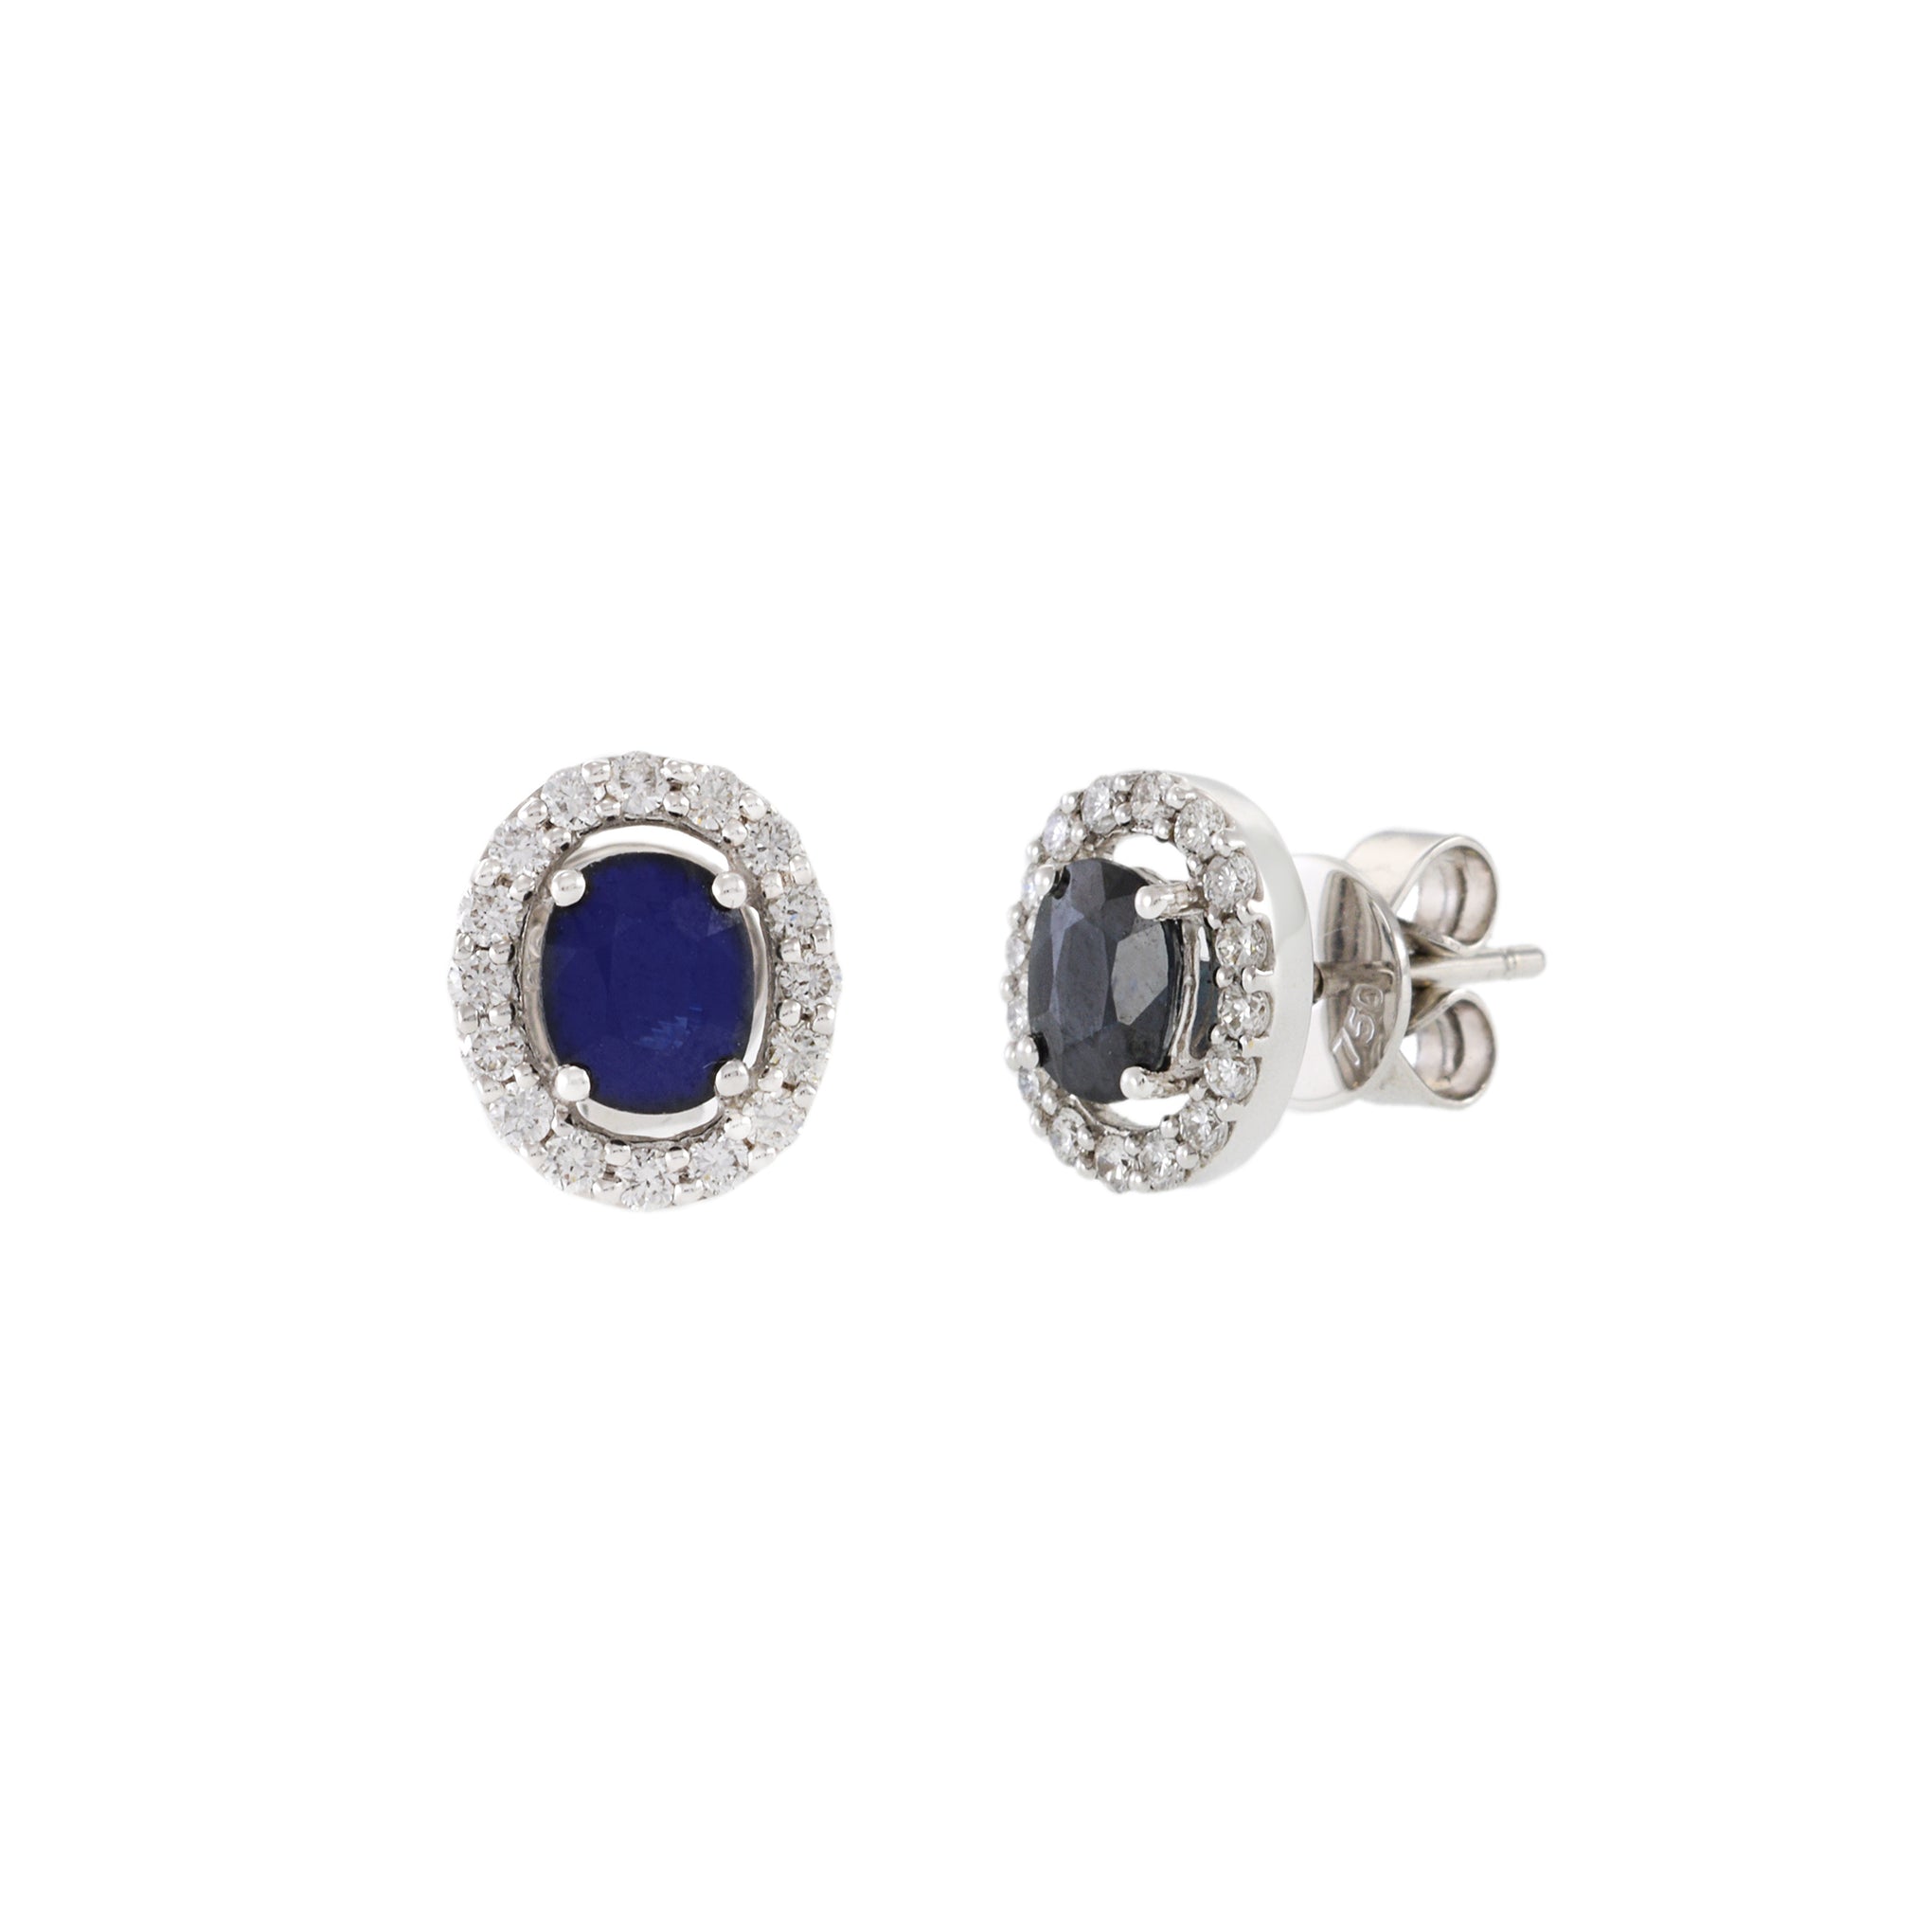 18KT White Gold Sapphire And Diamond Earrings